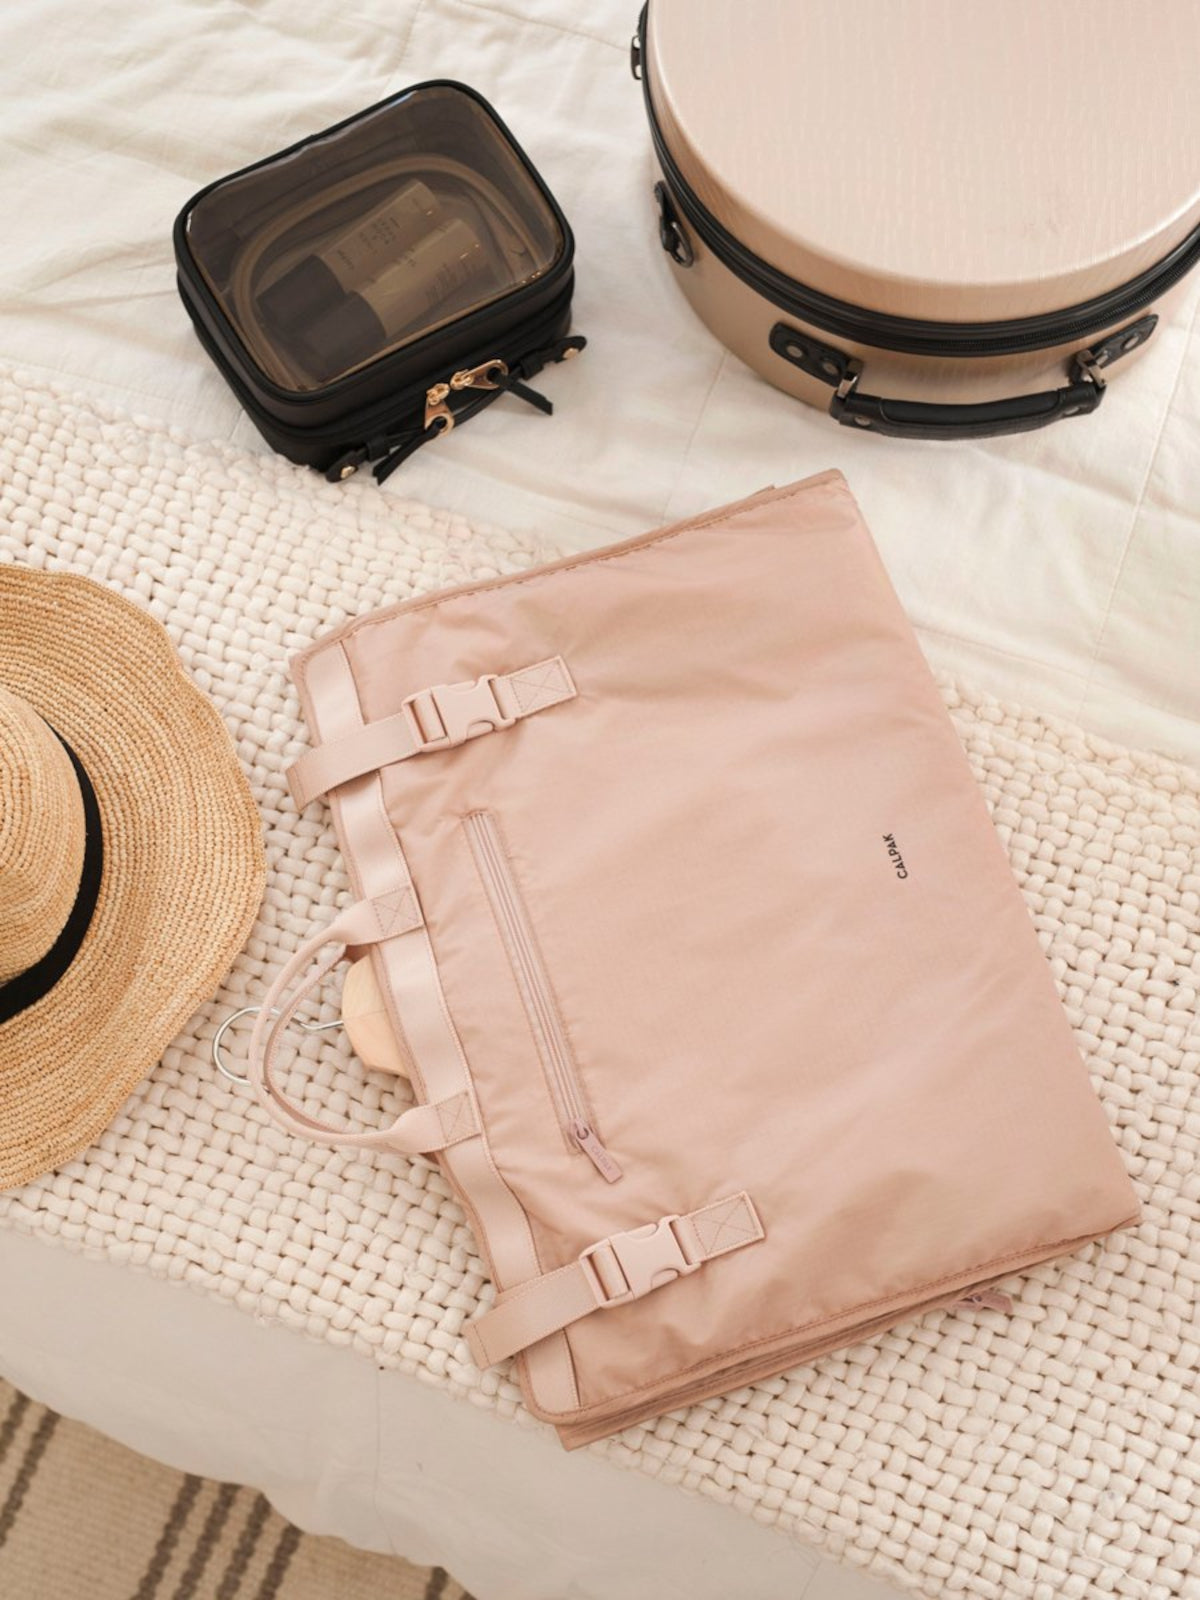 carry-on garment bag for trips in light pink mauve